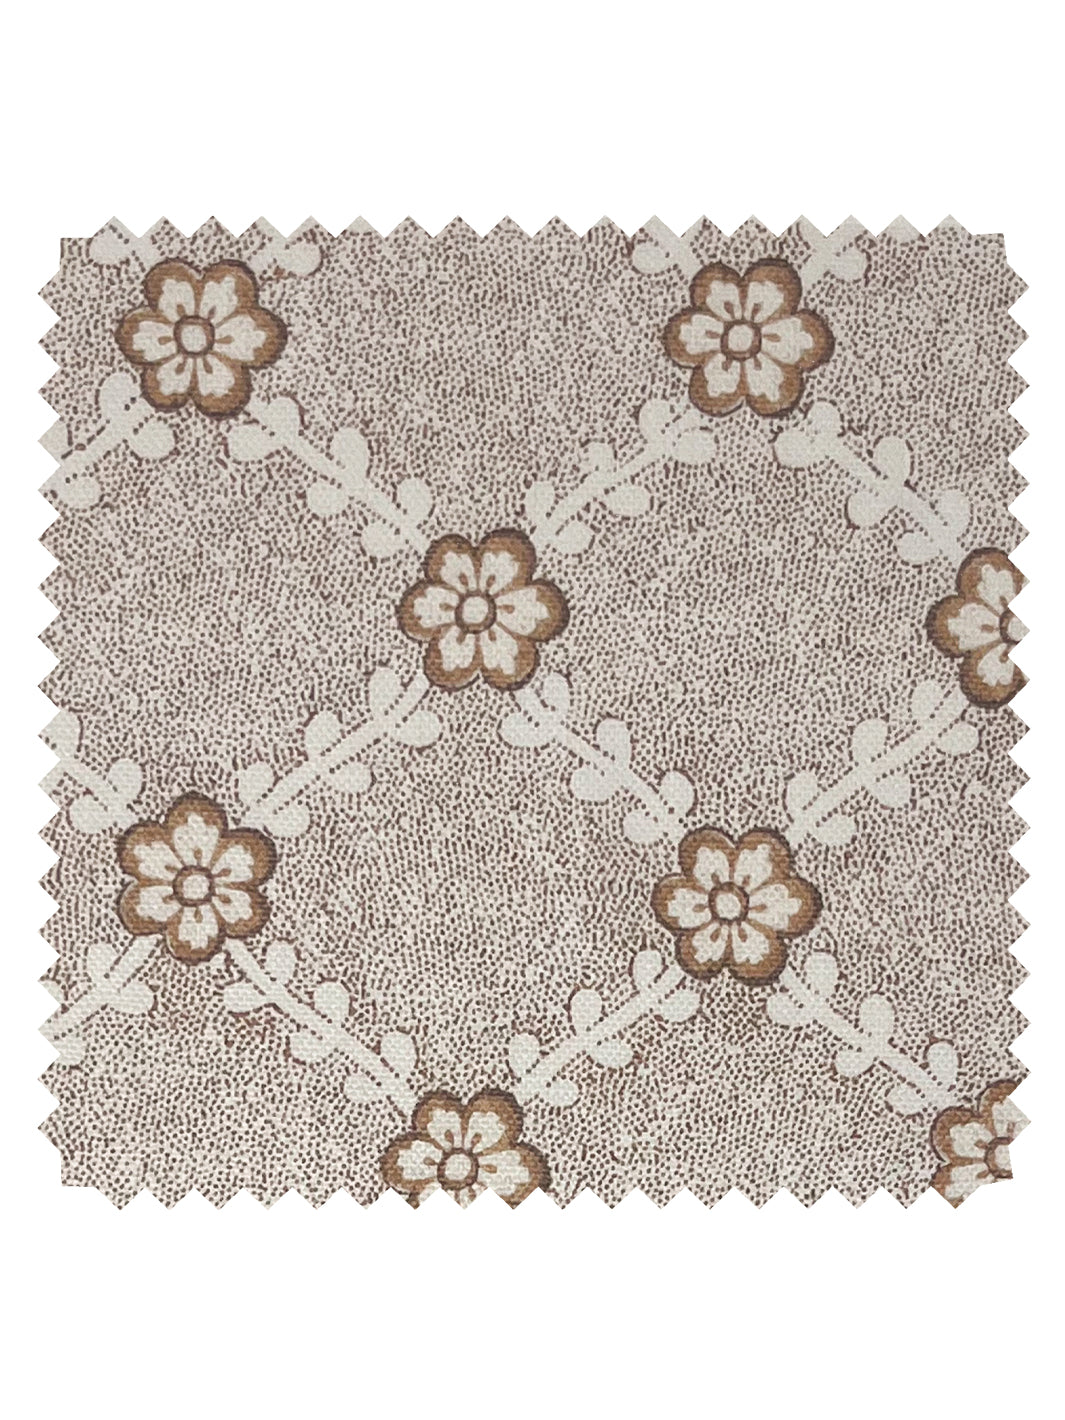 'Lucia' Linen Fabric by Nathan Turner - Brown